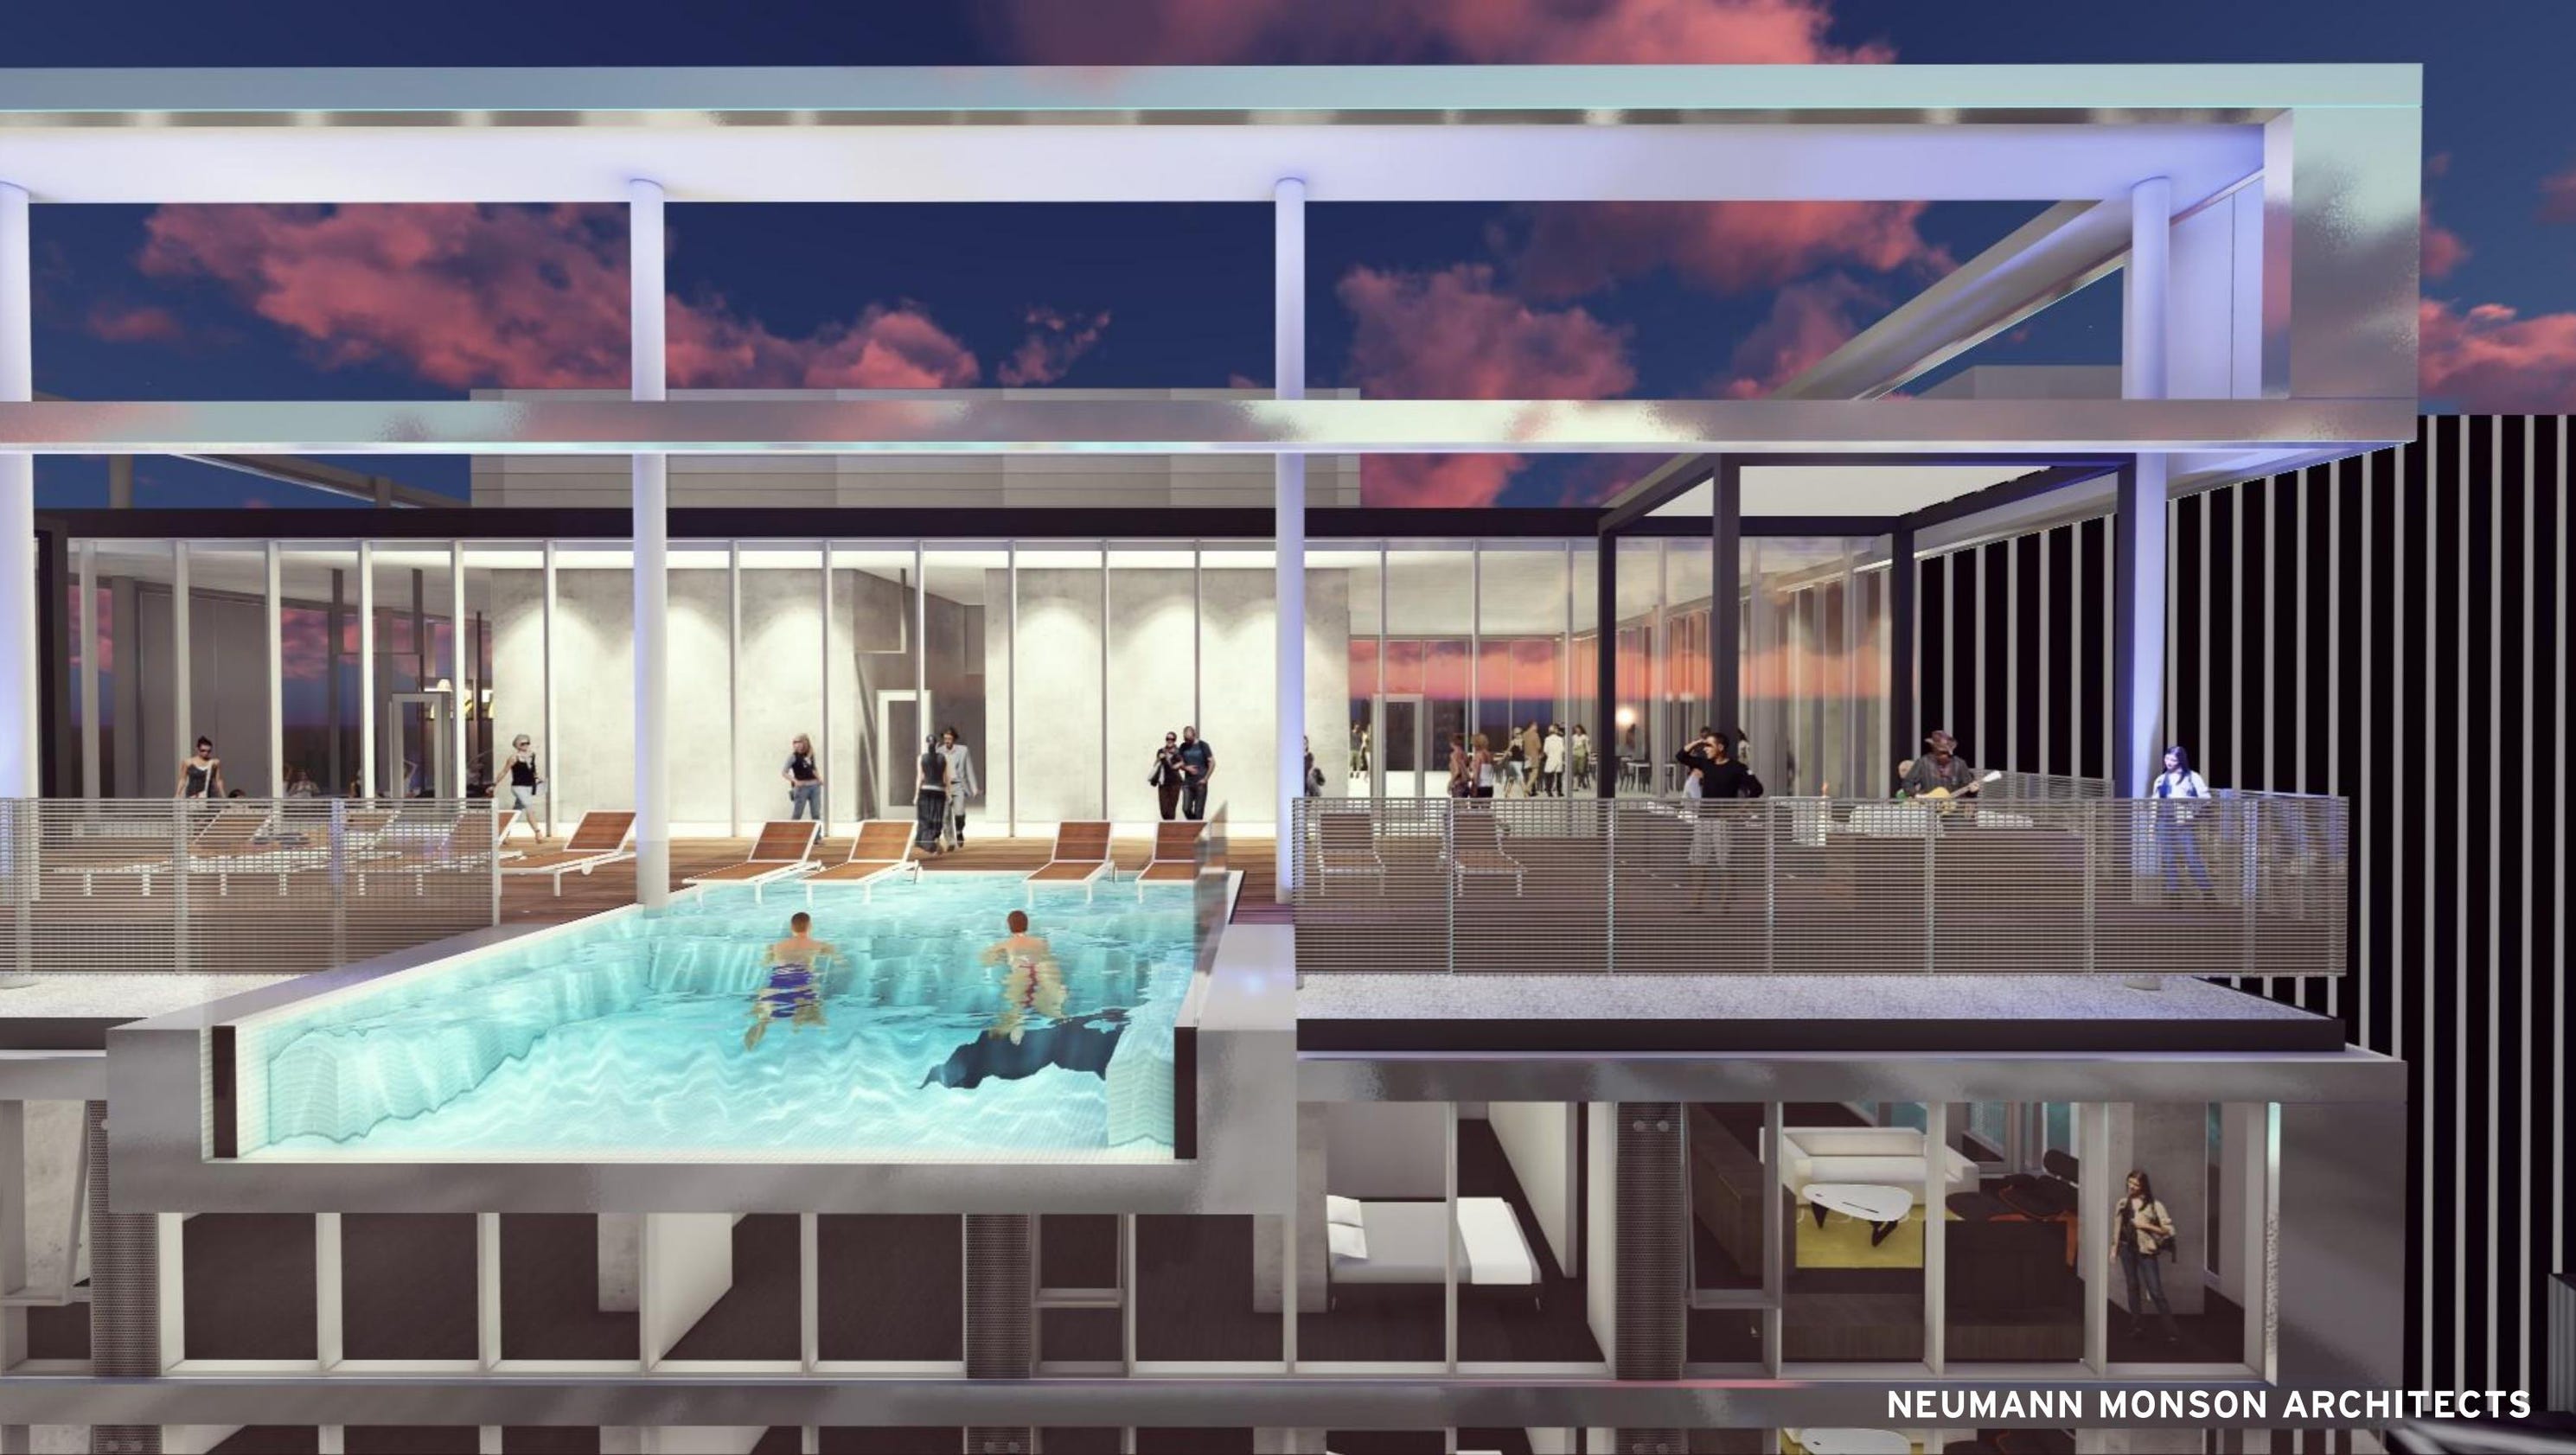 Hanging rooftop pool will let swimmers see 26 stories down